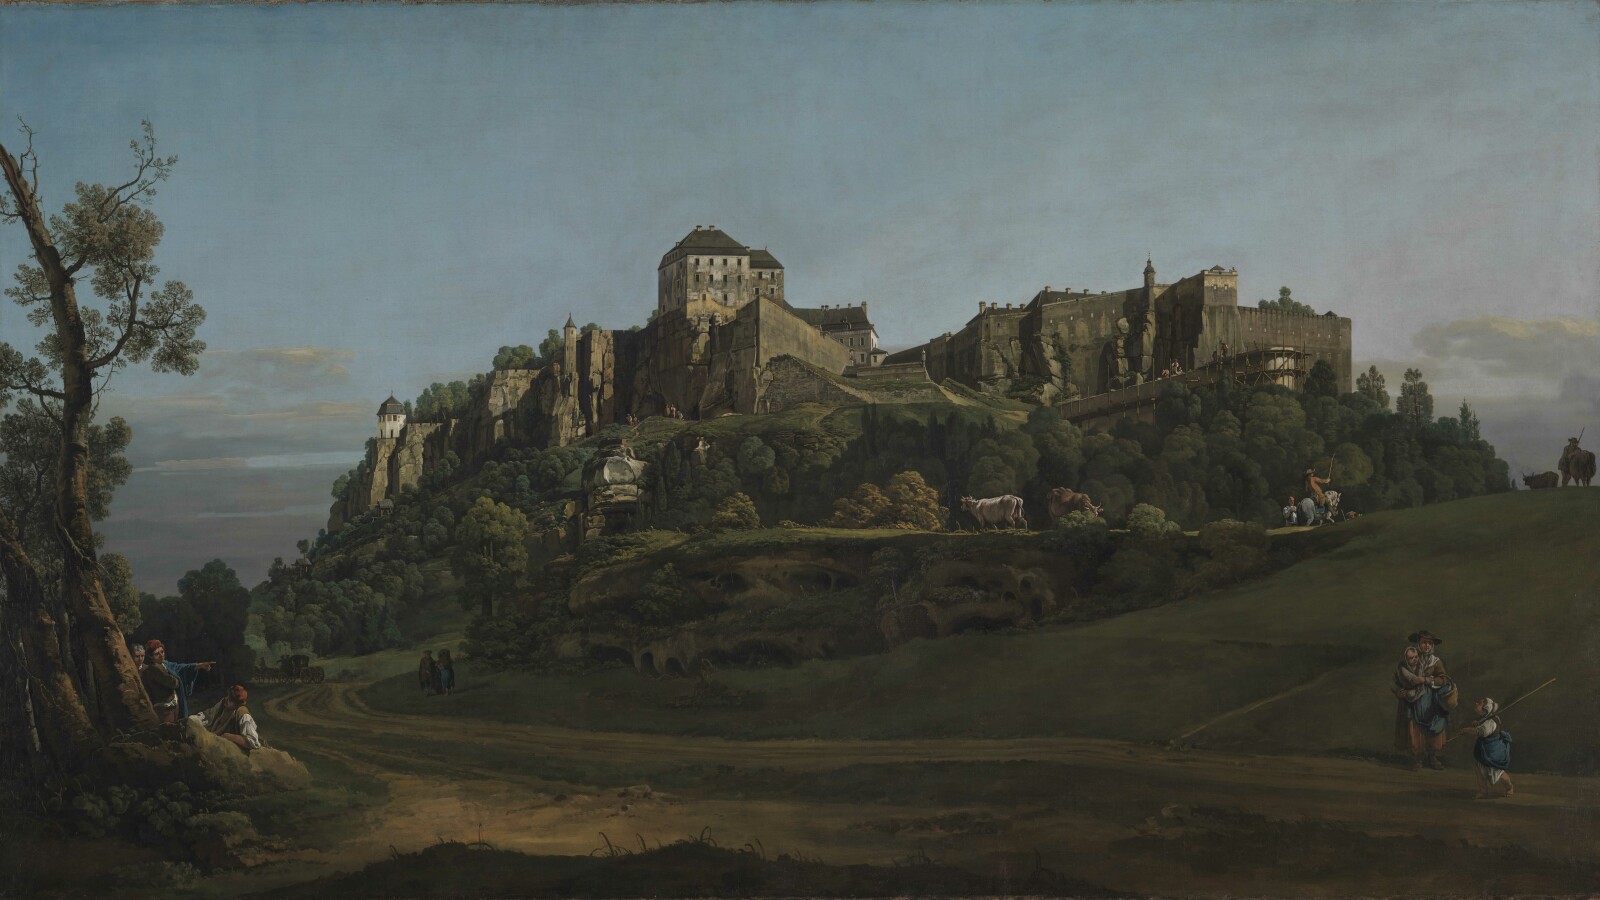 A painting called 'The Fortress of Königstein from the North' by Bernardo Bellotto